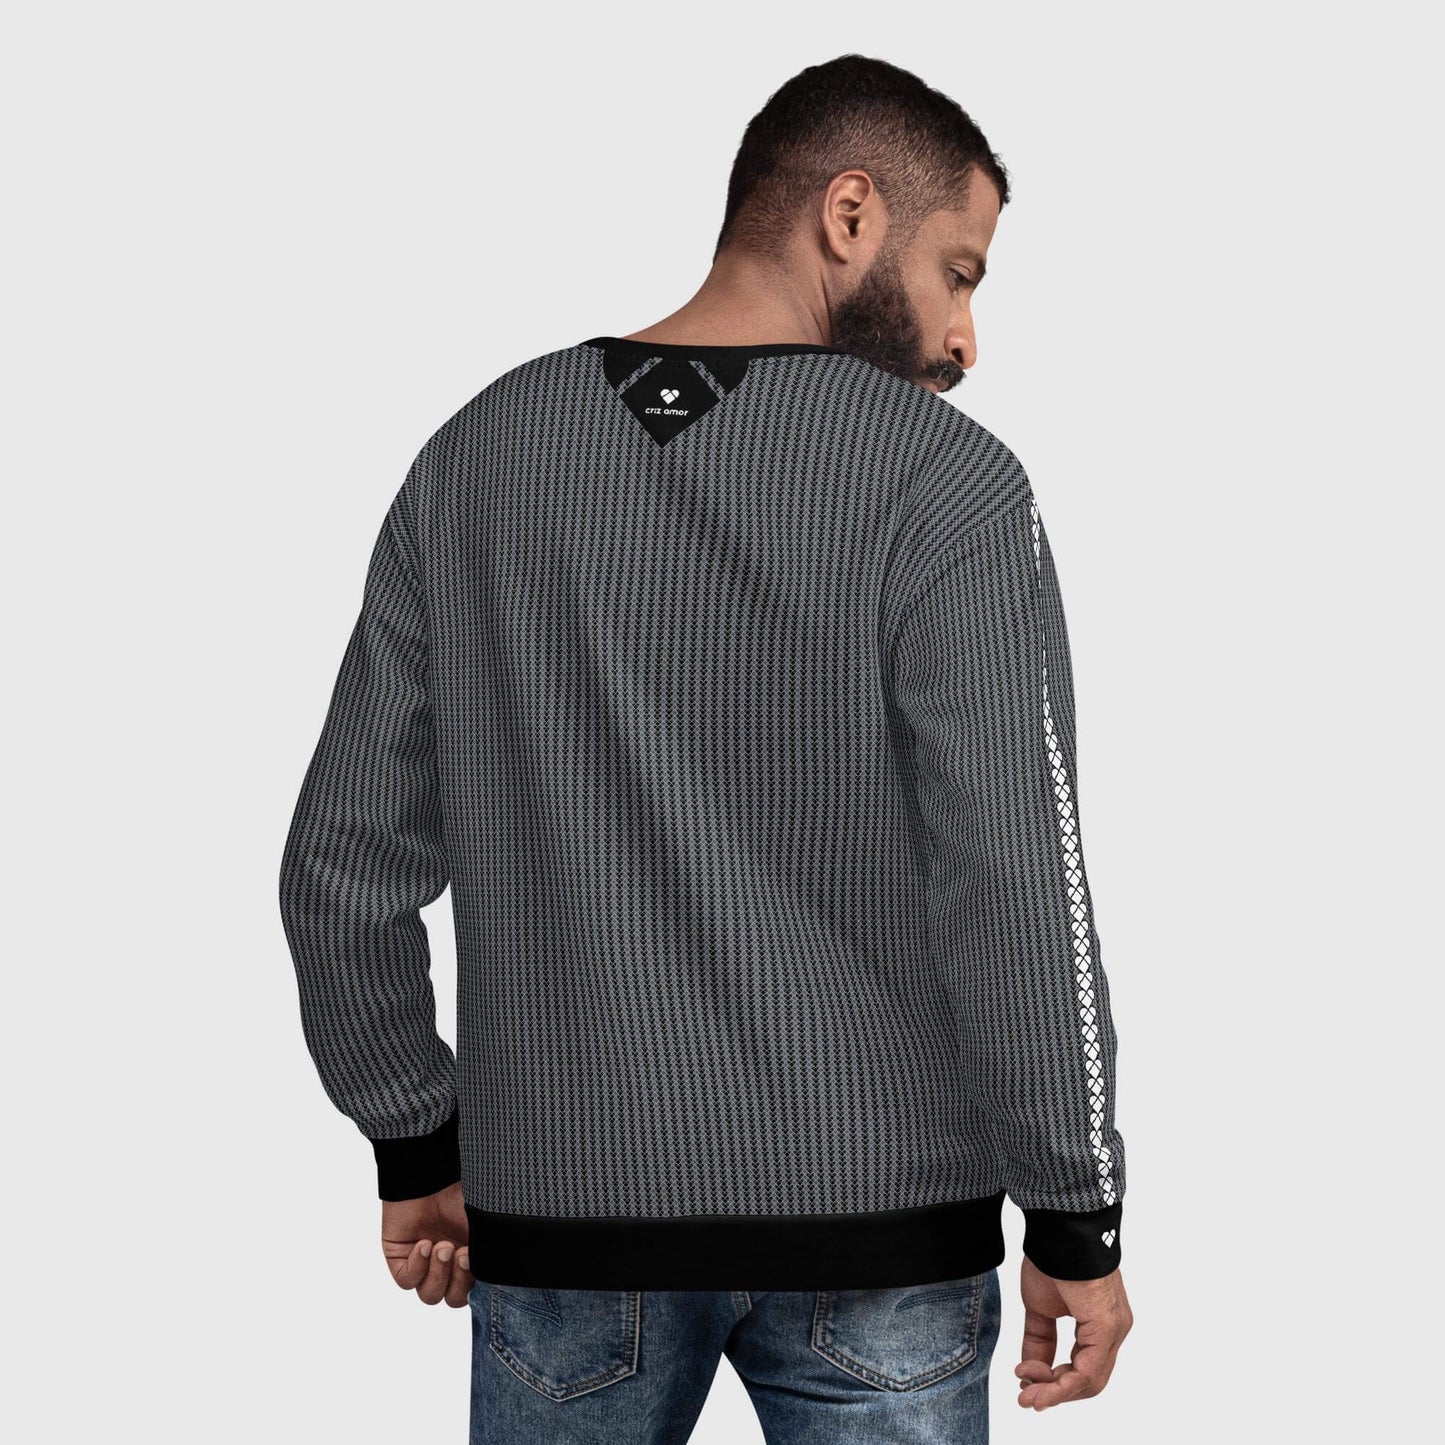 male model wearing a black sweatshirt with a heart-shaped geometrical pattern in two shades of gray by CRiZ AMOR's Amor Primero Capsule Collection